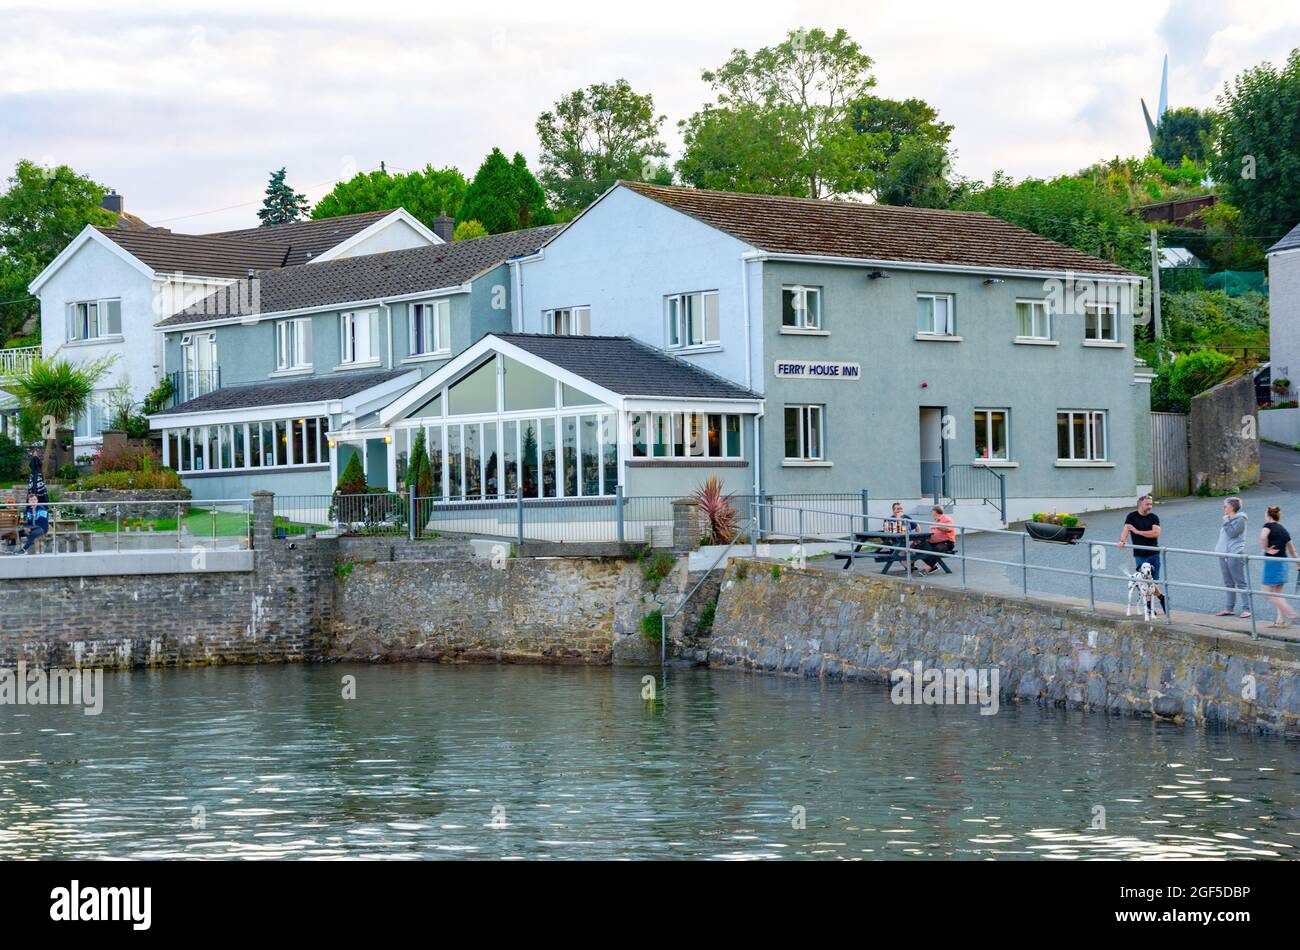 The Ferry House Inn at Hazelbeach, Milford Haven, Pembrokeshire, Wales is a guest house, pub and restaurant offering accommodation to holidaymakers. Stock Photo